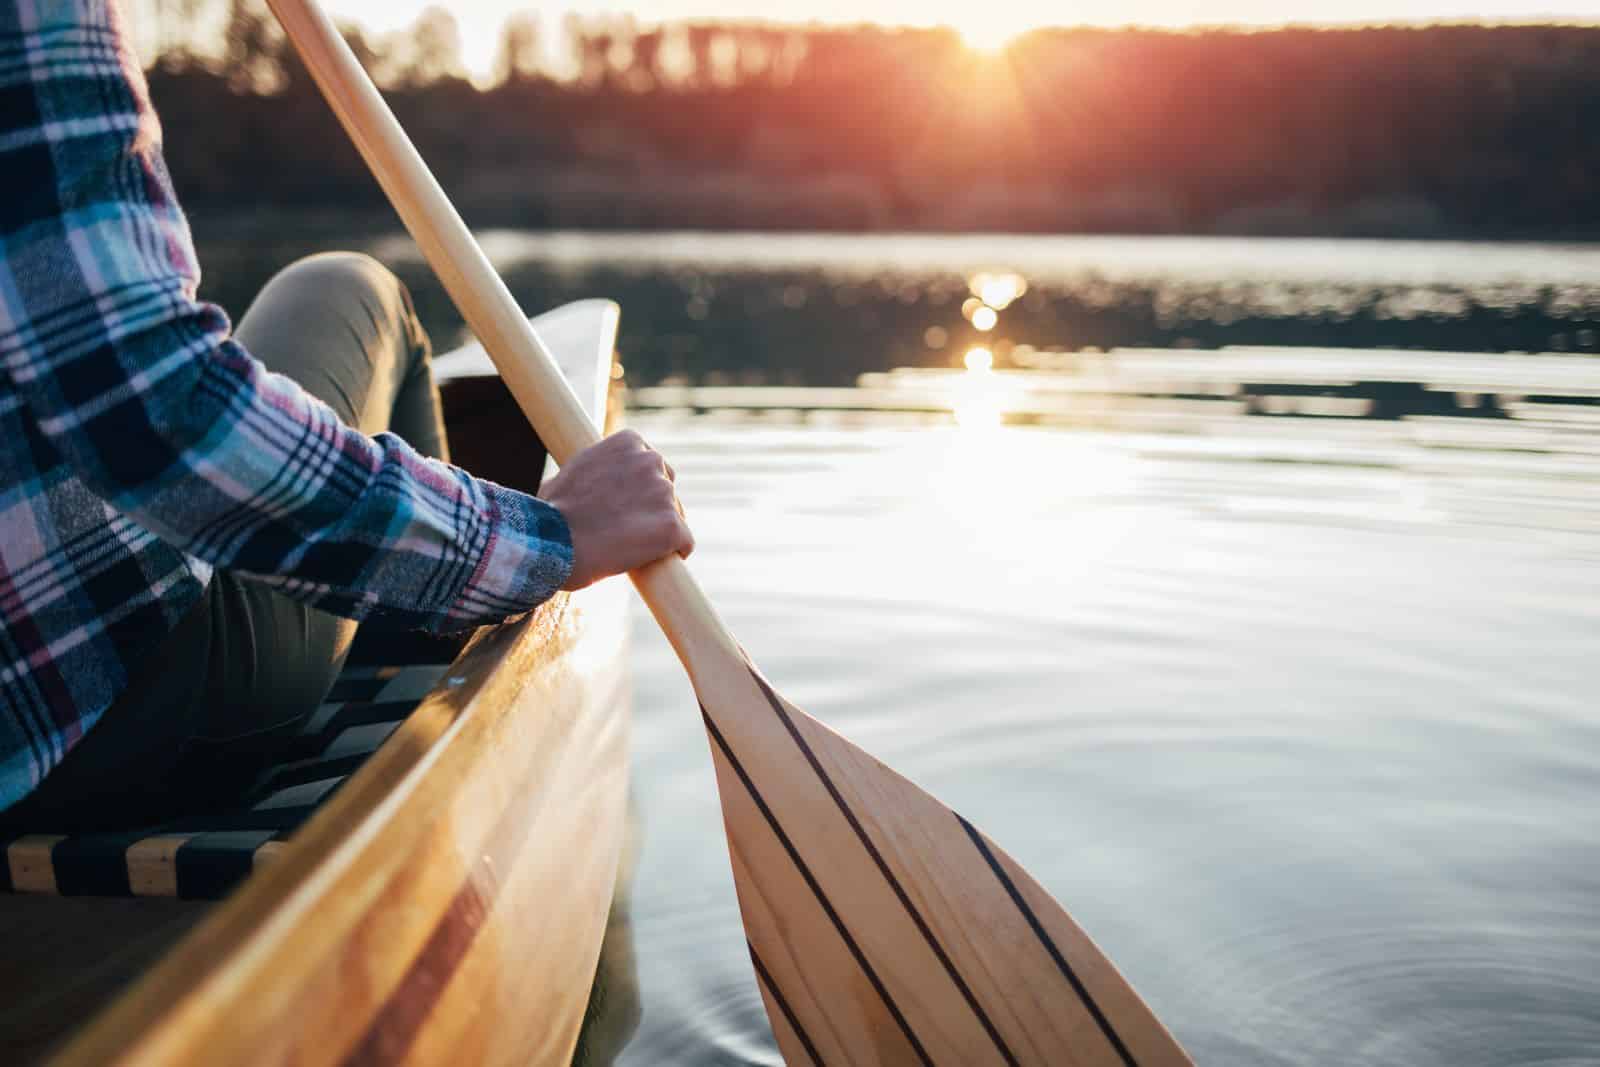 <p class="wp-caption-text">Image Credit: Shutterstock / Popartic</p>  <p>Canoe down a real river at Secret Woods Nature Center. It’s a quiet, untouched spot—because we both know you’d rather not share your paddle space.</p>